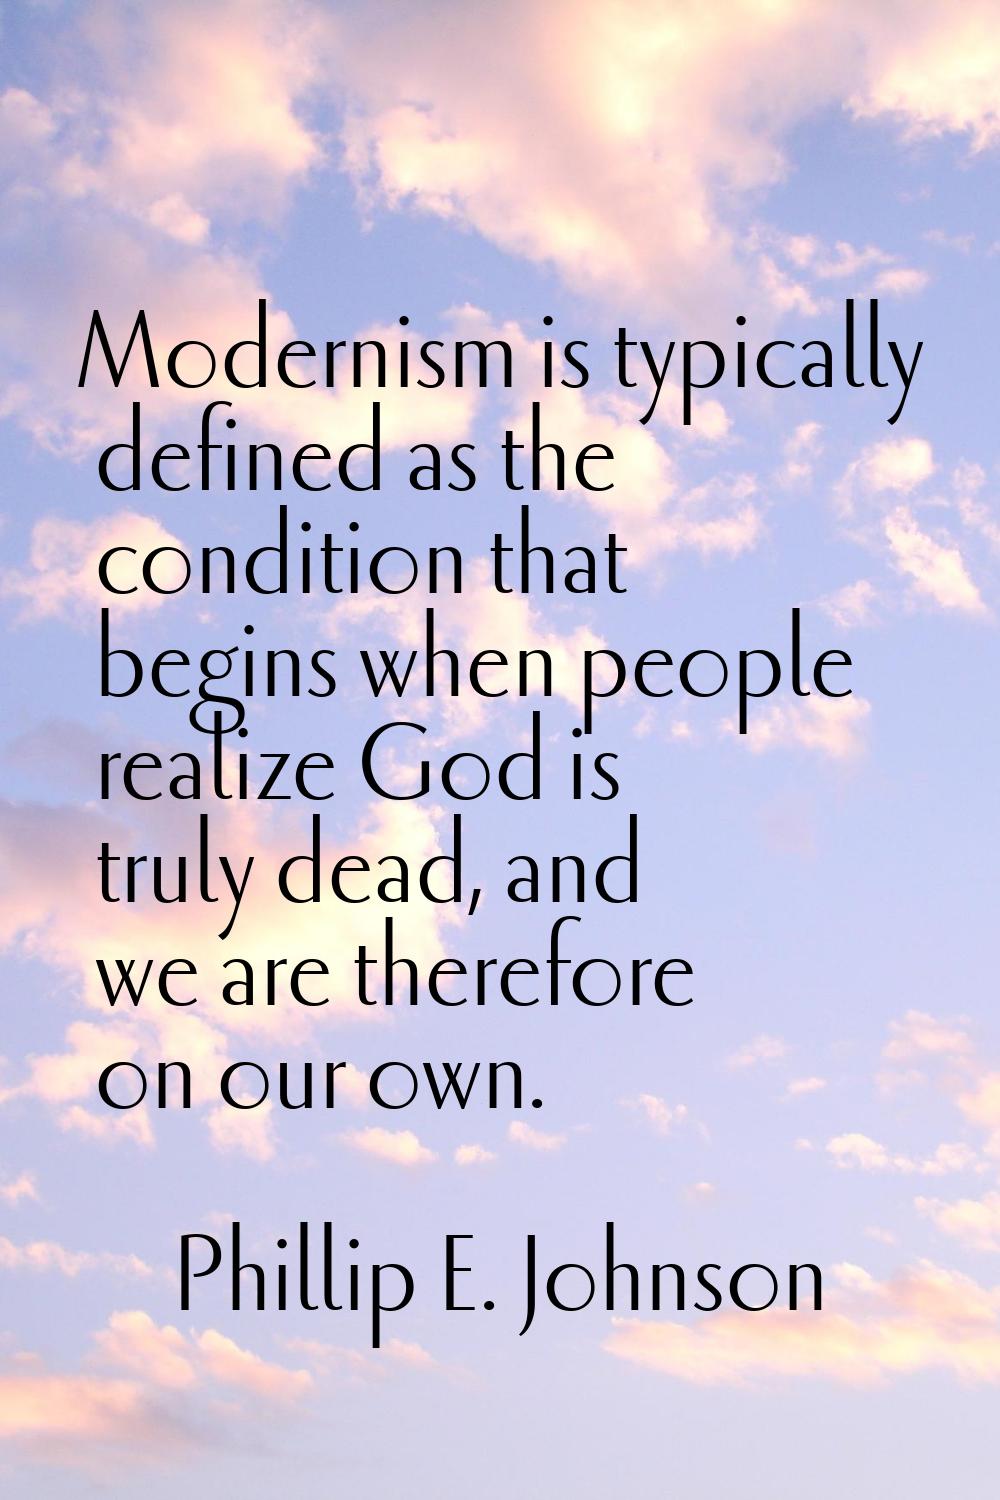 Modernism is typically defined as the condition that begins when people realize God is truly dead, 